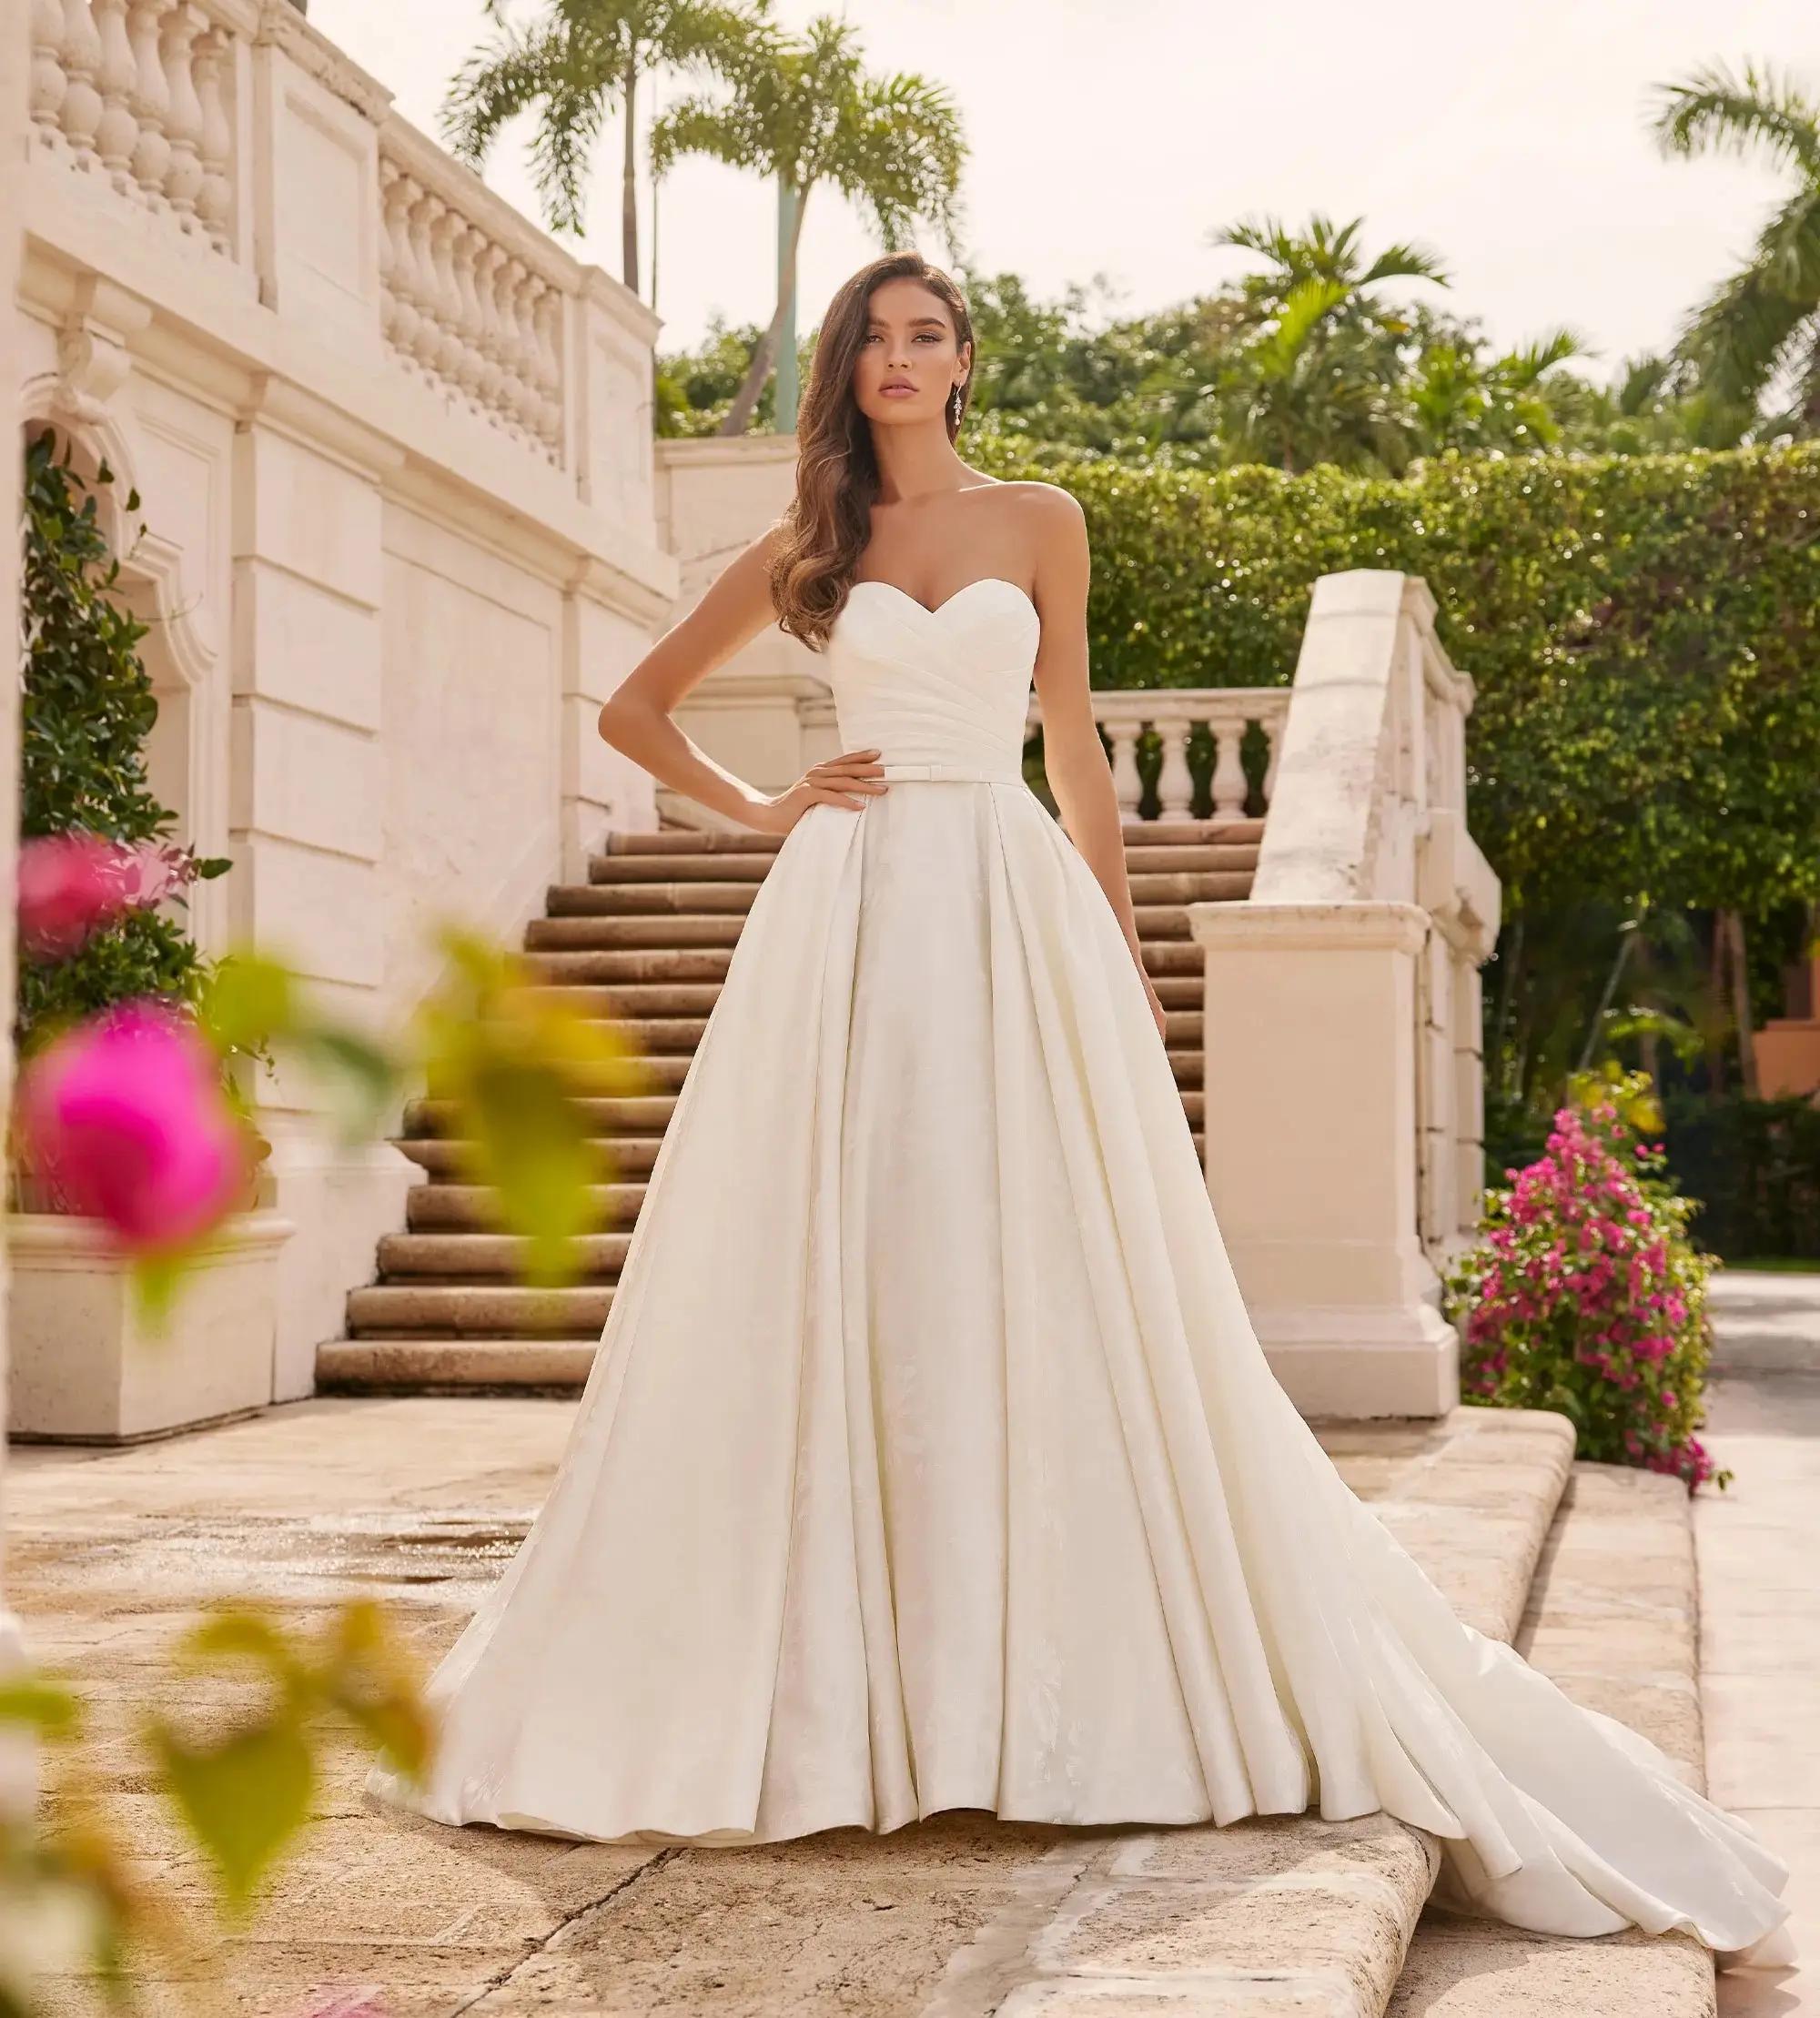 Blonde woman in ball style wedding gown with deep neckline